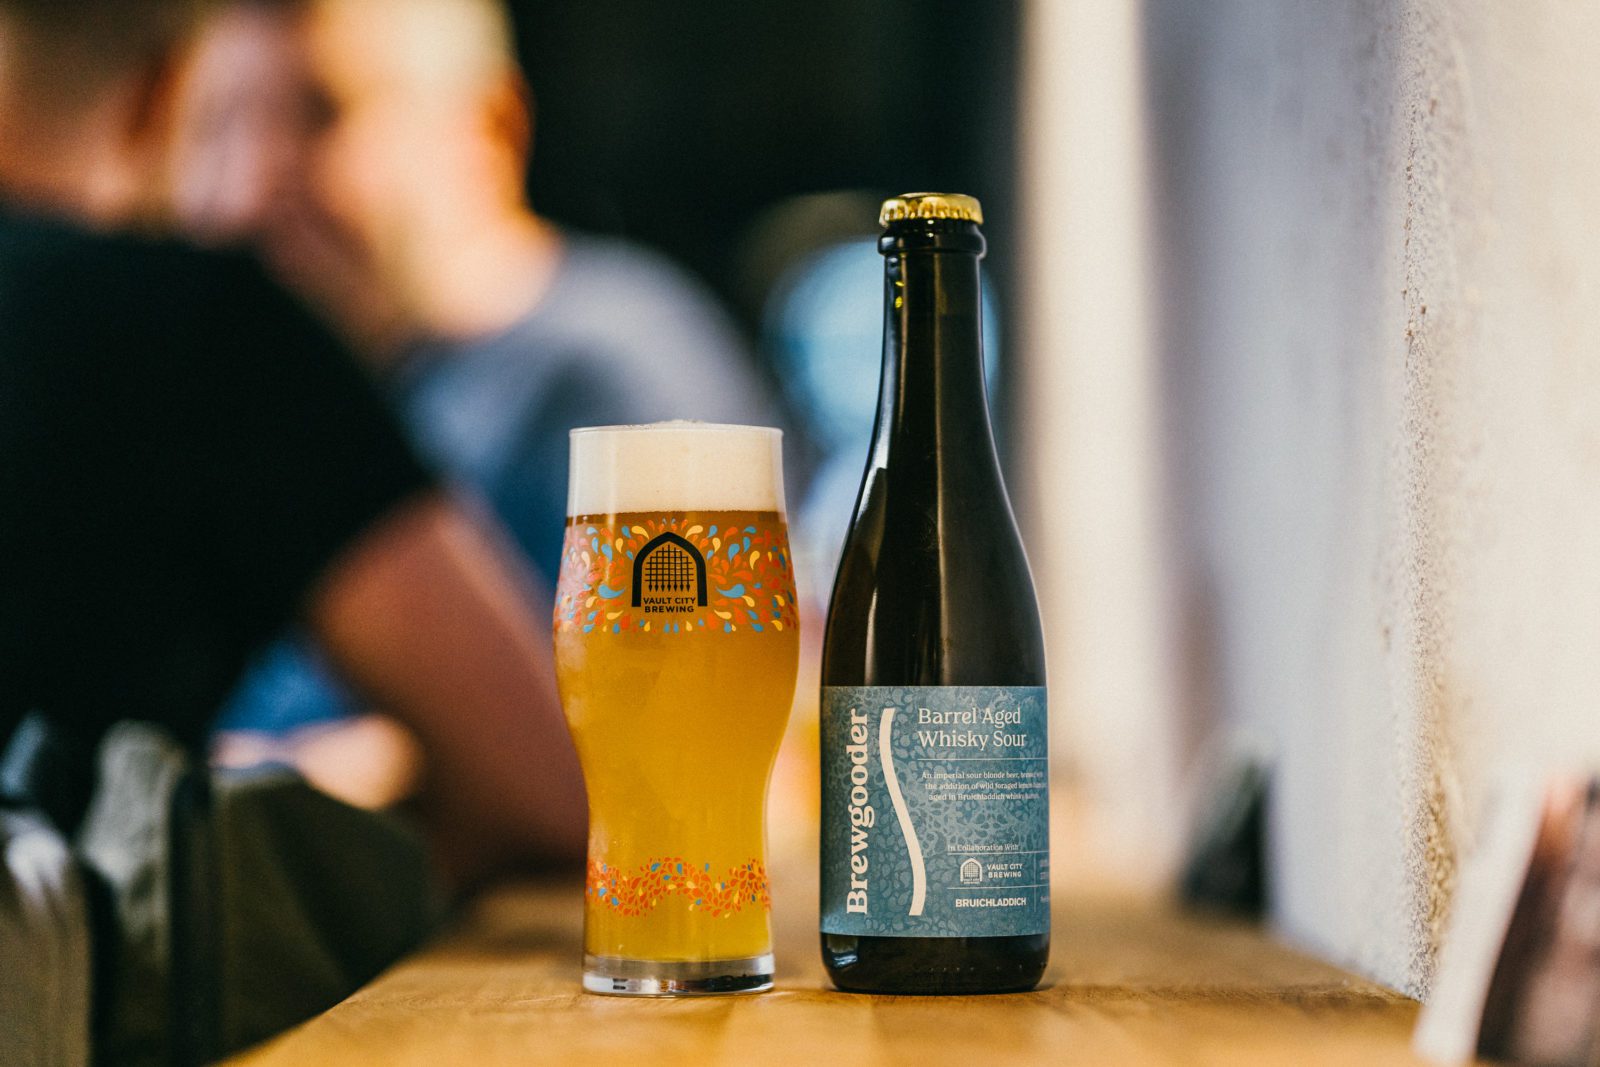 Brewgooder, Bruichladdich and Vault City to auction 'whisky sour' beer for charity - Scotsman Whisky